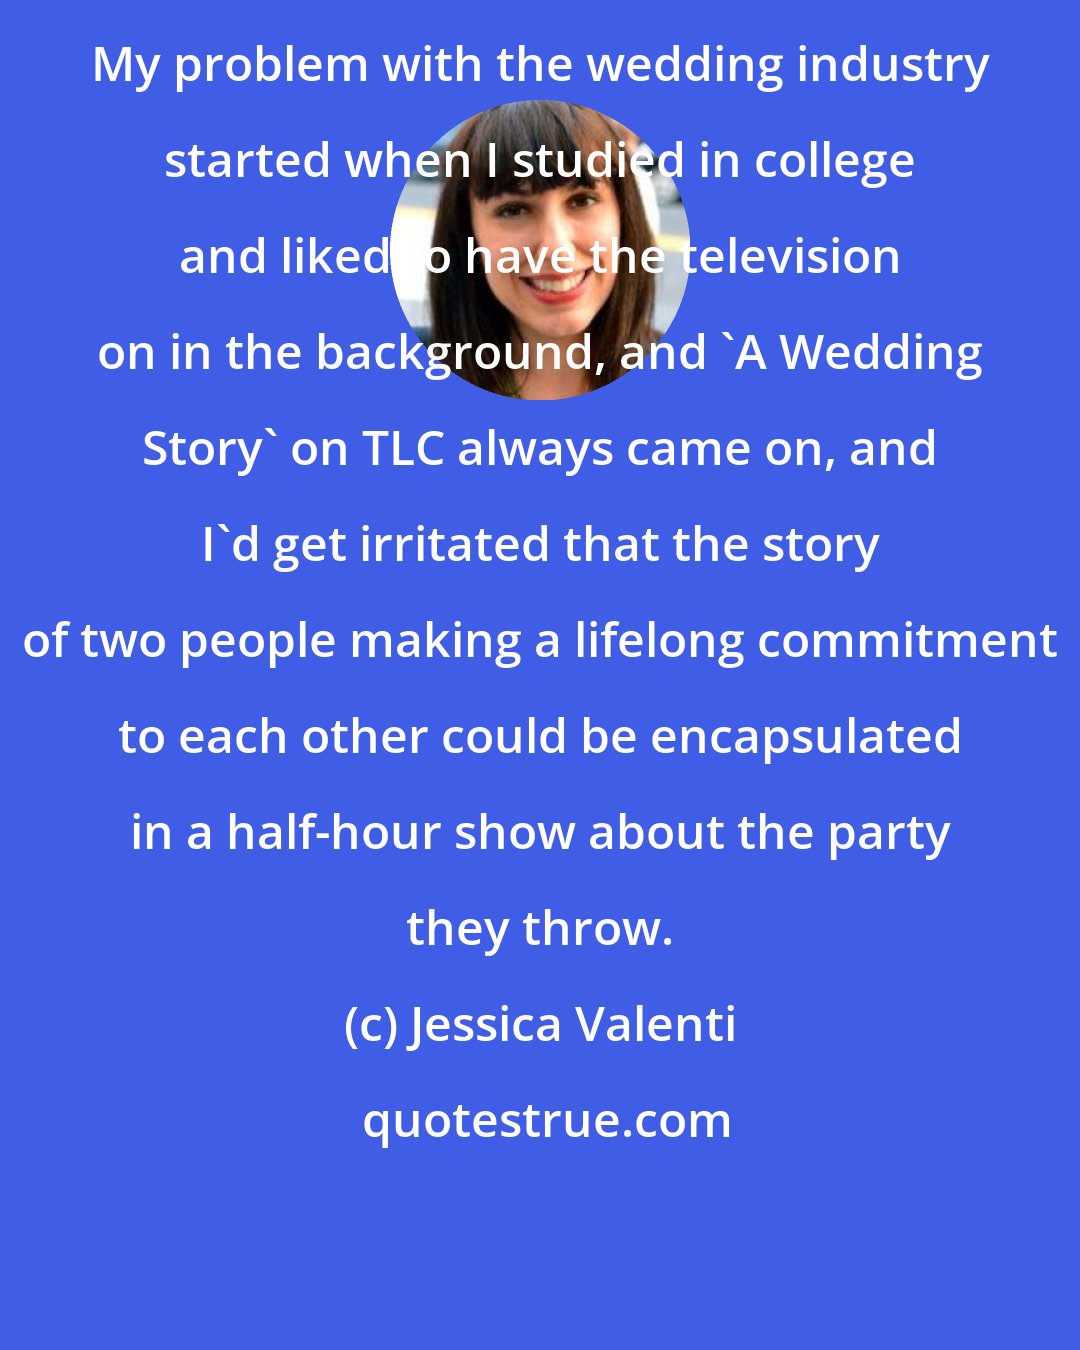 Jessica Valenti: My problem with the wedding industry started when I studied in college and liked to have the television on in the background, and 'A Wedding Story' on TLC always came on, and I'd get irritated that the story of two people making a lifelong commitment to each other could be encapsulated in a half-hour show about the party they throw.